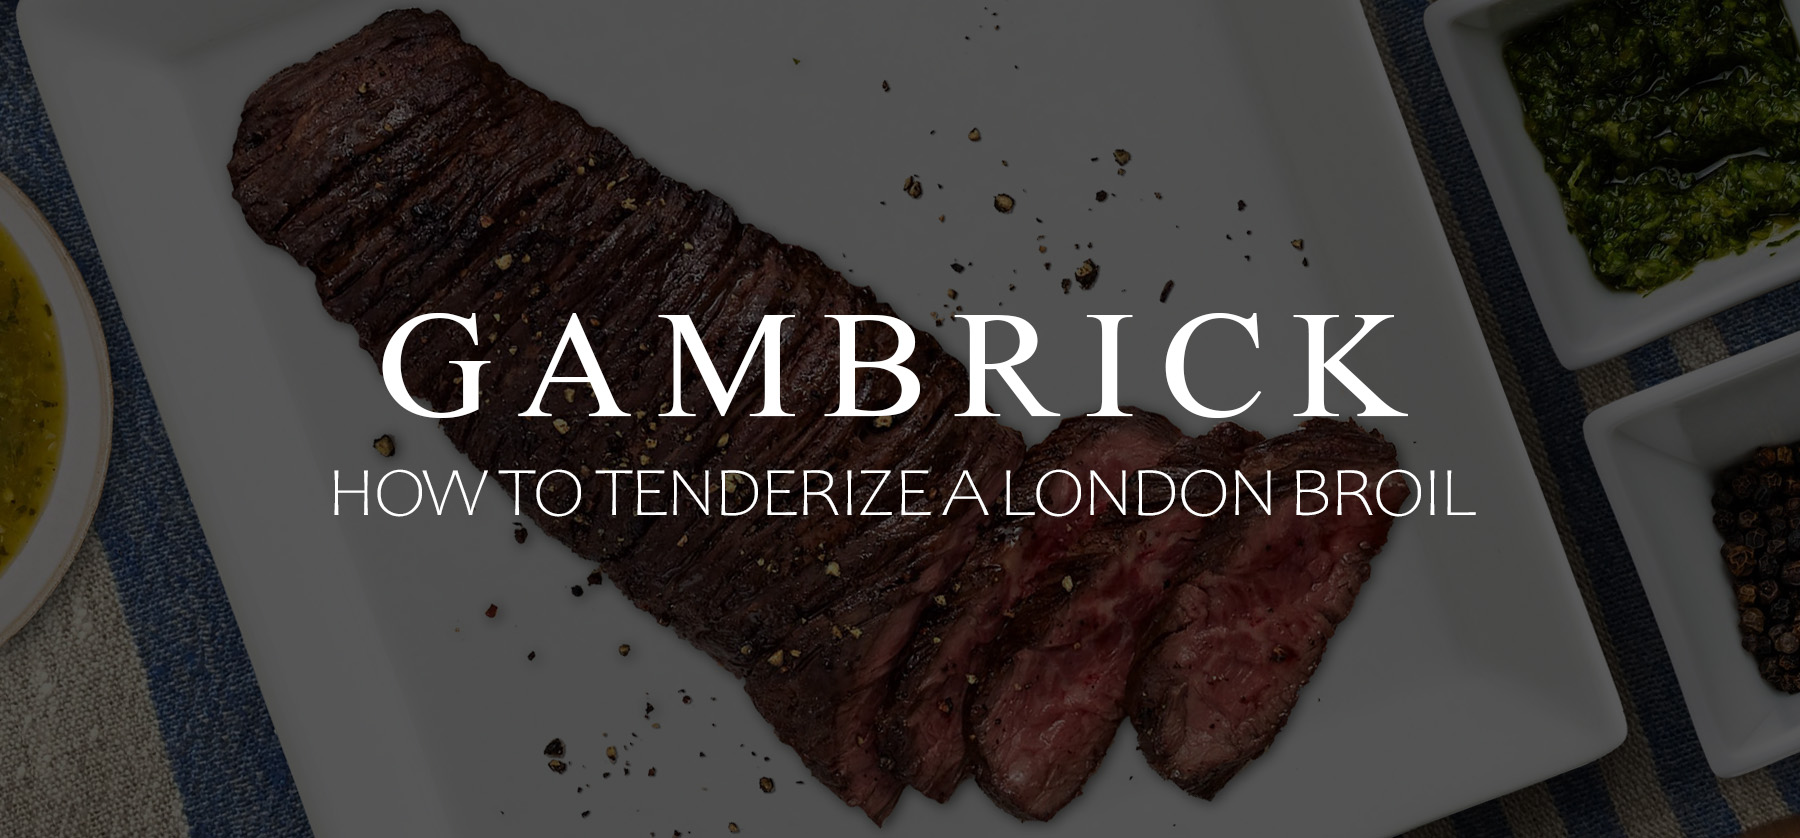 how to tenderize a London Broil banner 1.2